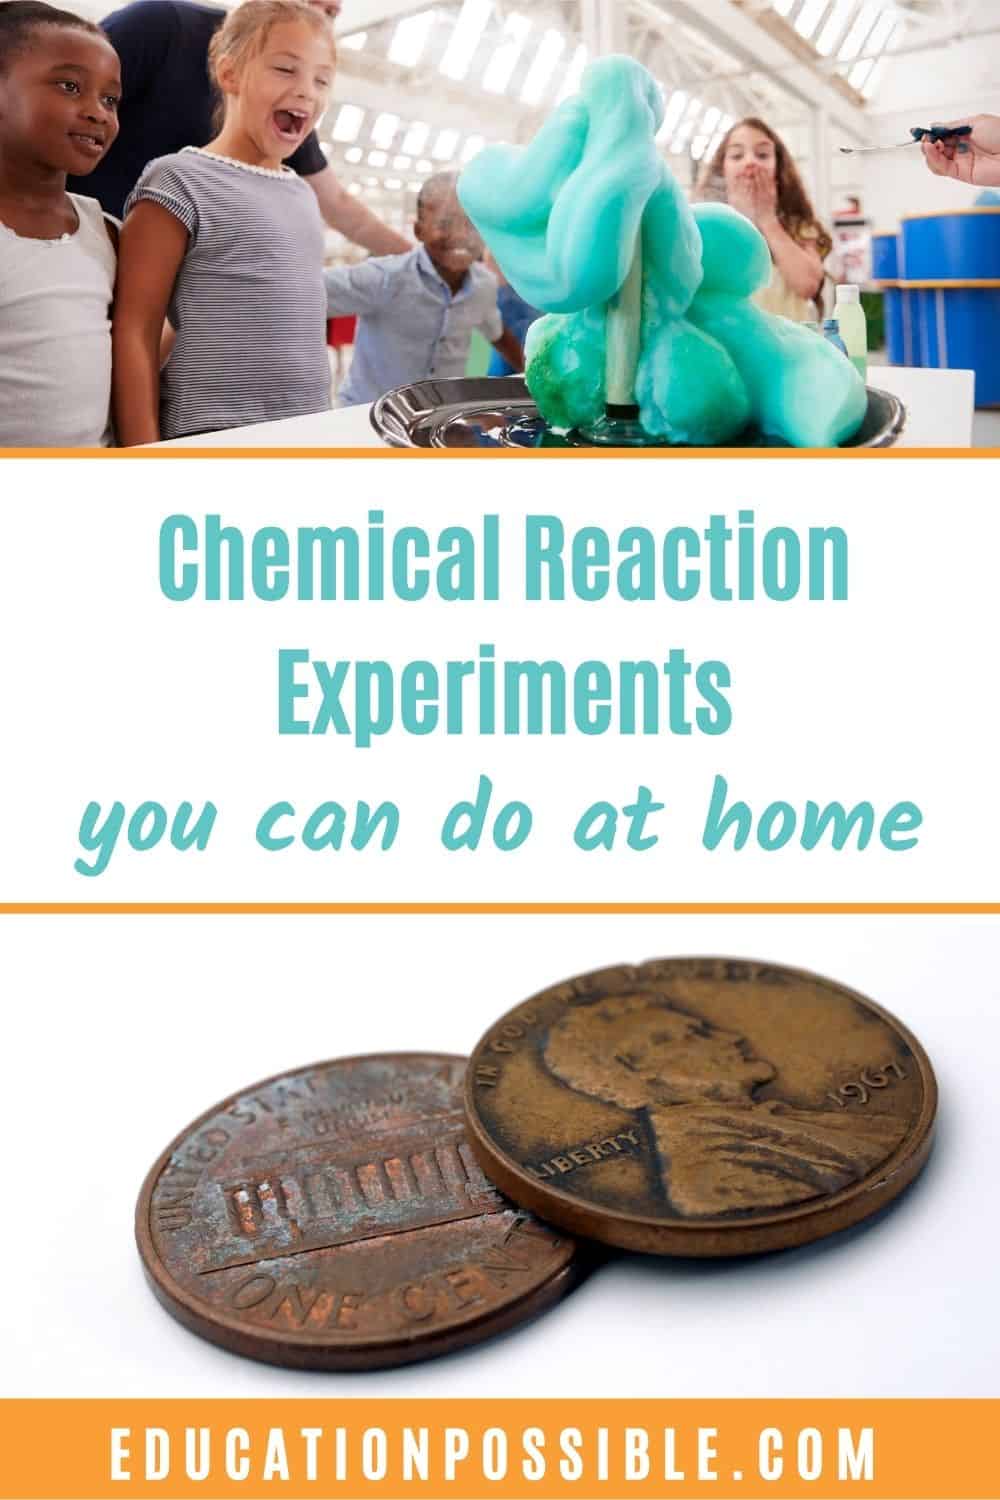 Kids making green elephant's toothpaste and tarnished pennies - chemical reaction experiments